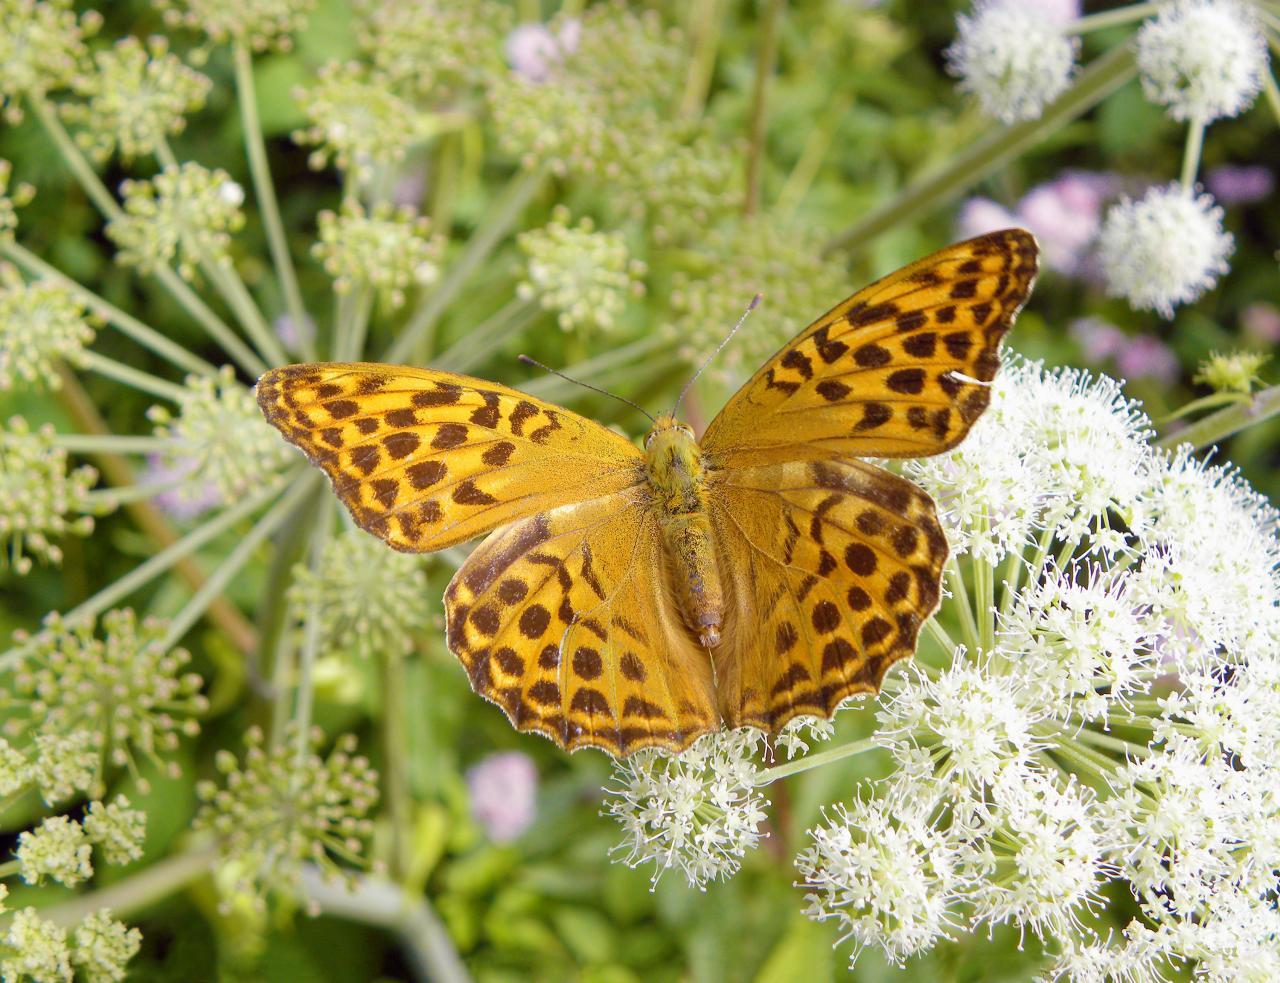 Butterfly with orange-brown colored wings sits on a white flower